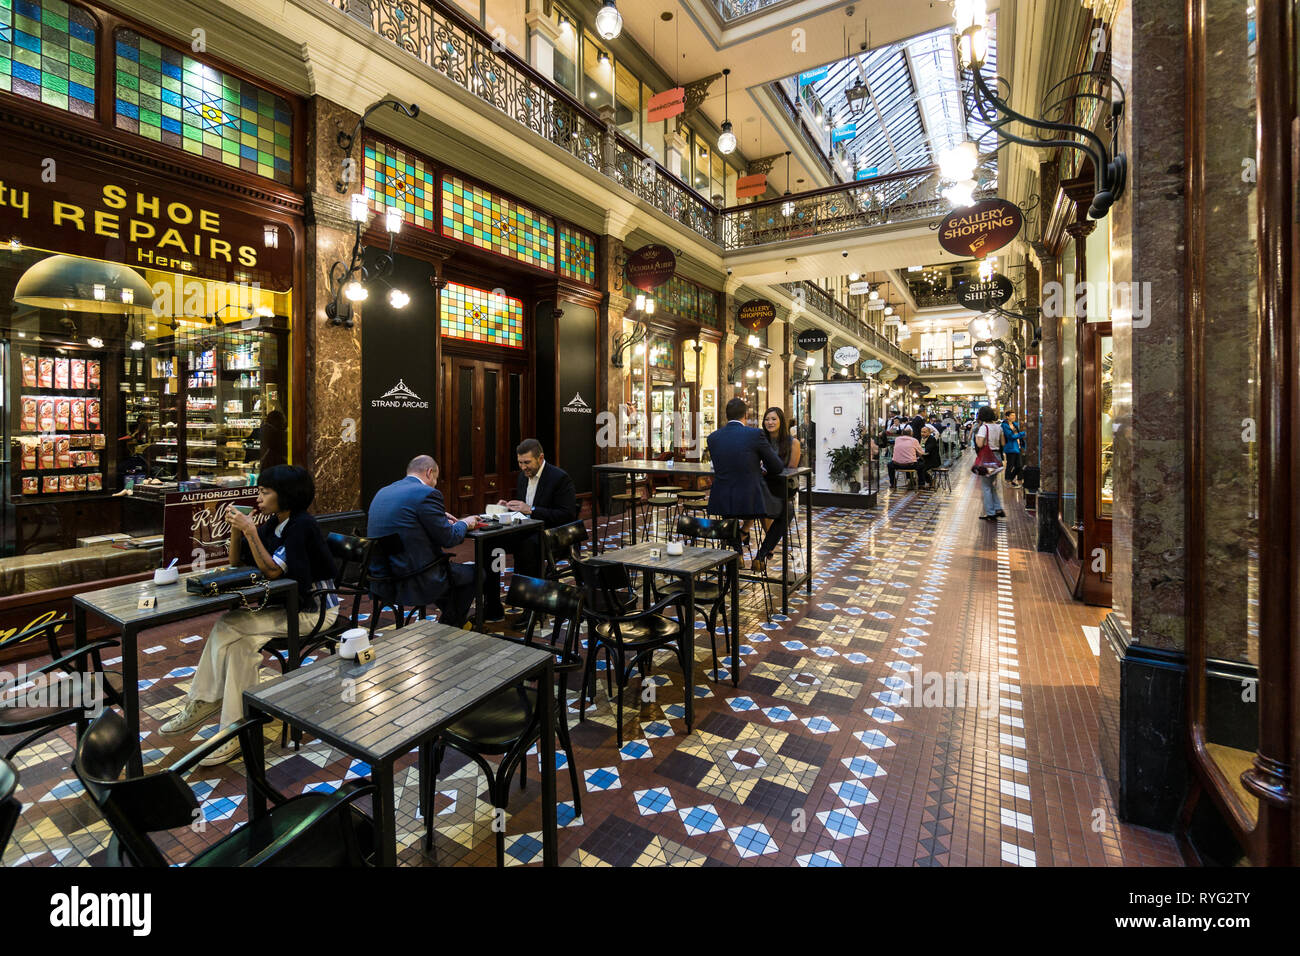 Sydney, Australia - May 6 2018: Interior view of the famous Victorian style Strand Arcade, an historic luxury shopping and dining gallery in the heart Stock Photo